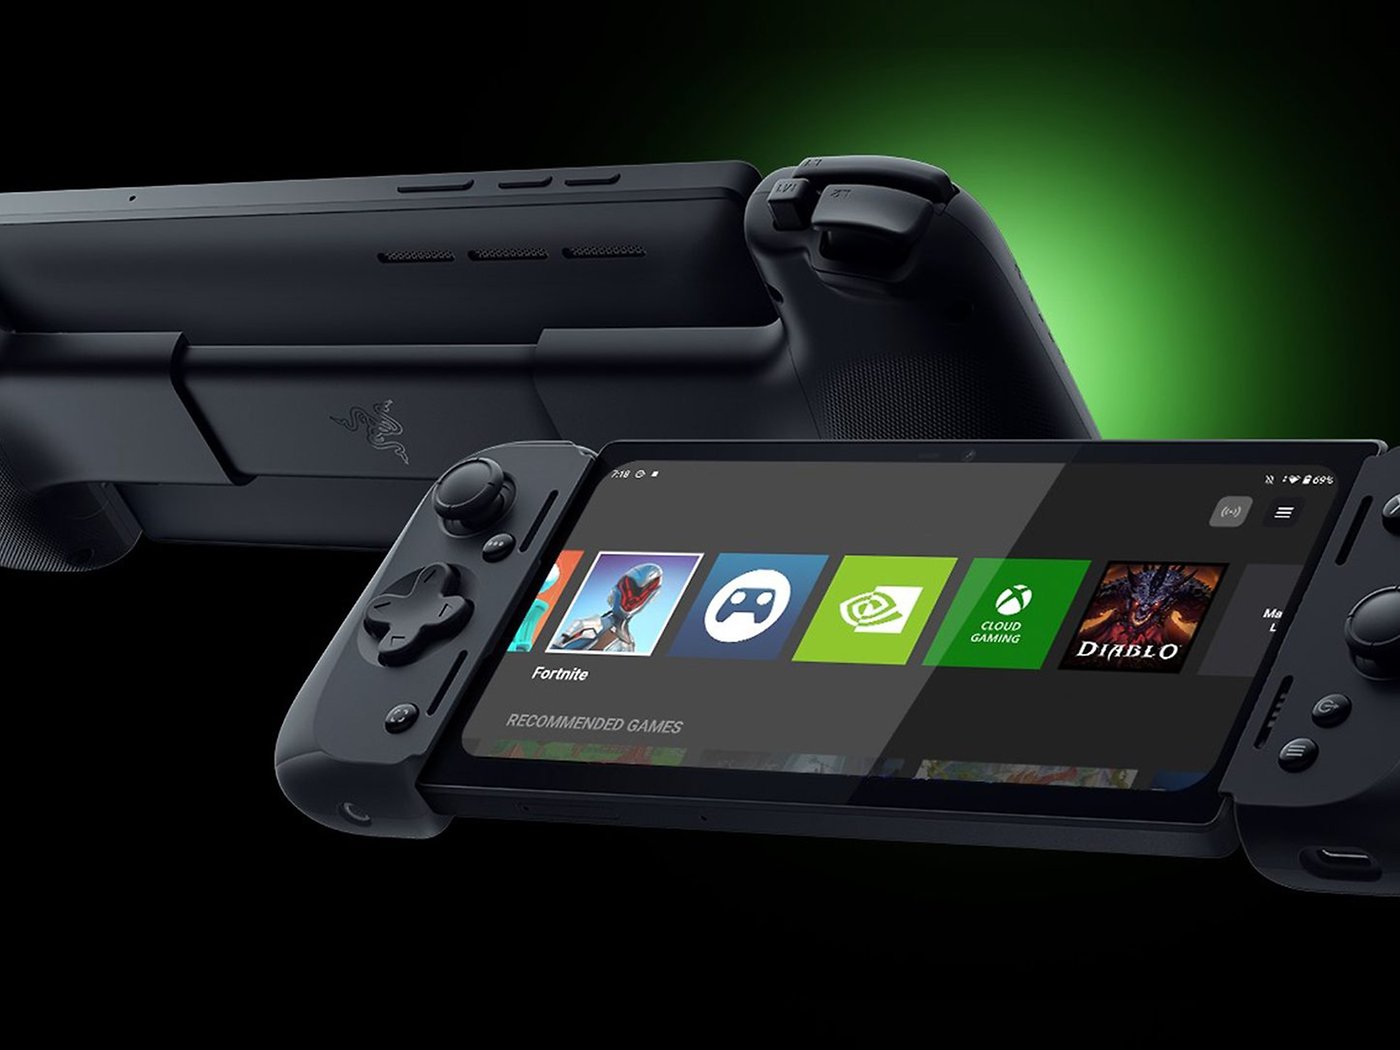 XBox Cloud Gaming, another great use for the SD, best handheld